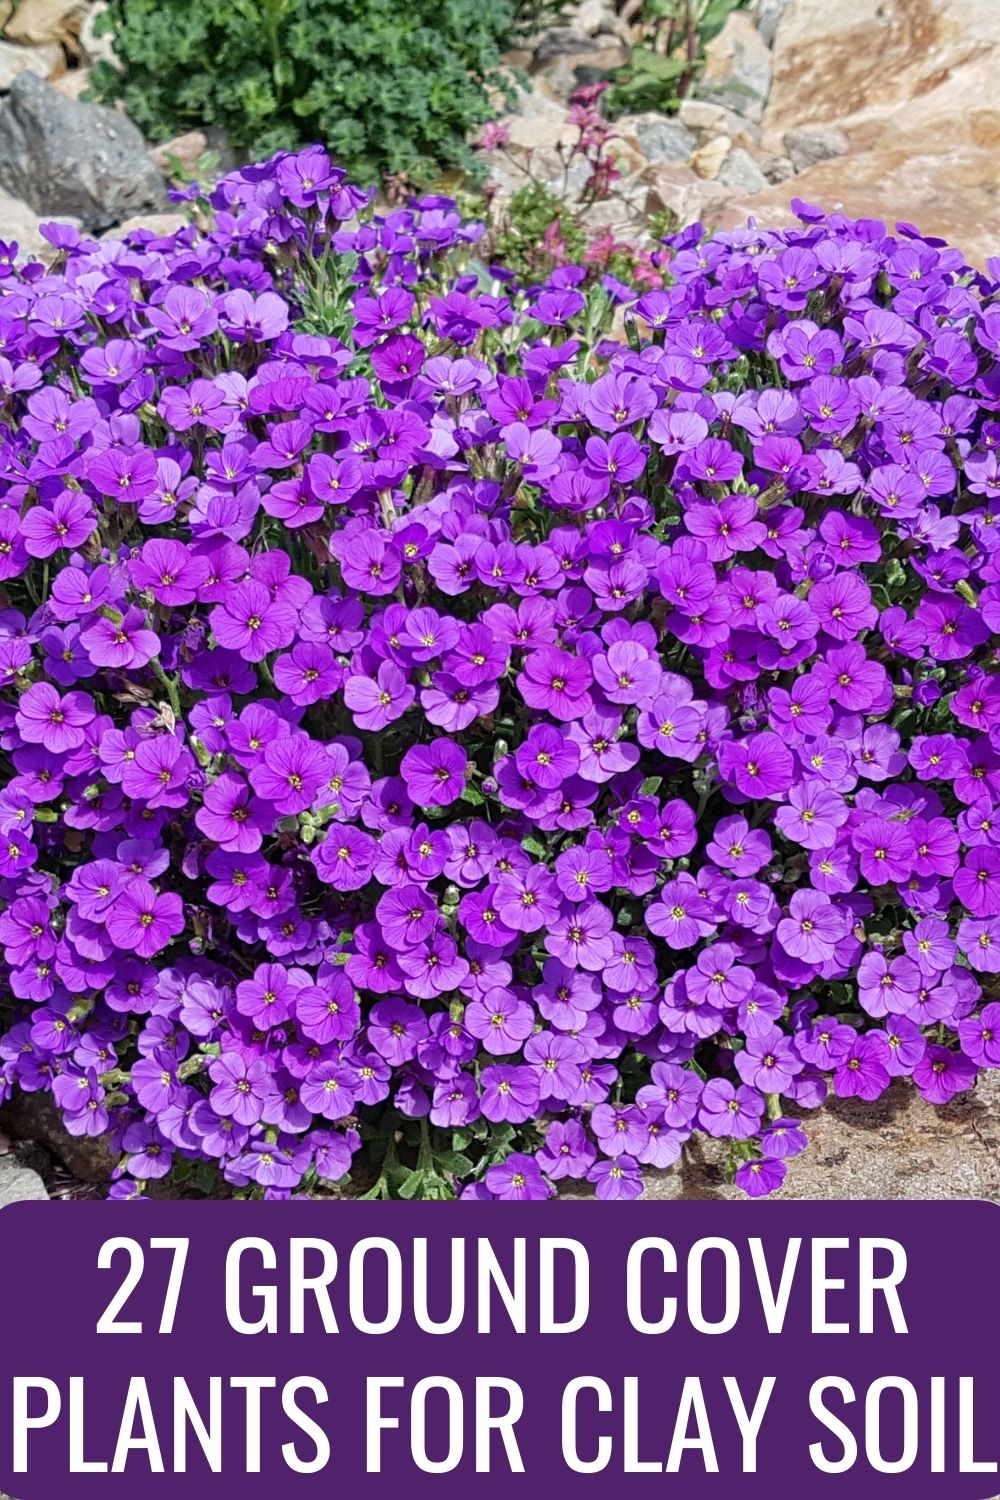 27 Ground Cover Plants For Clay Soil.